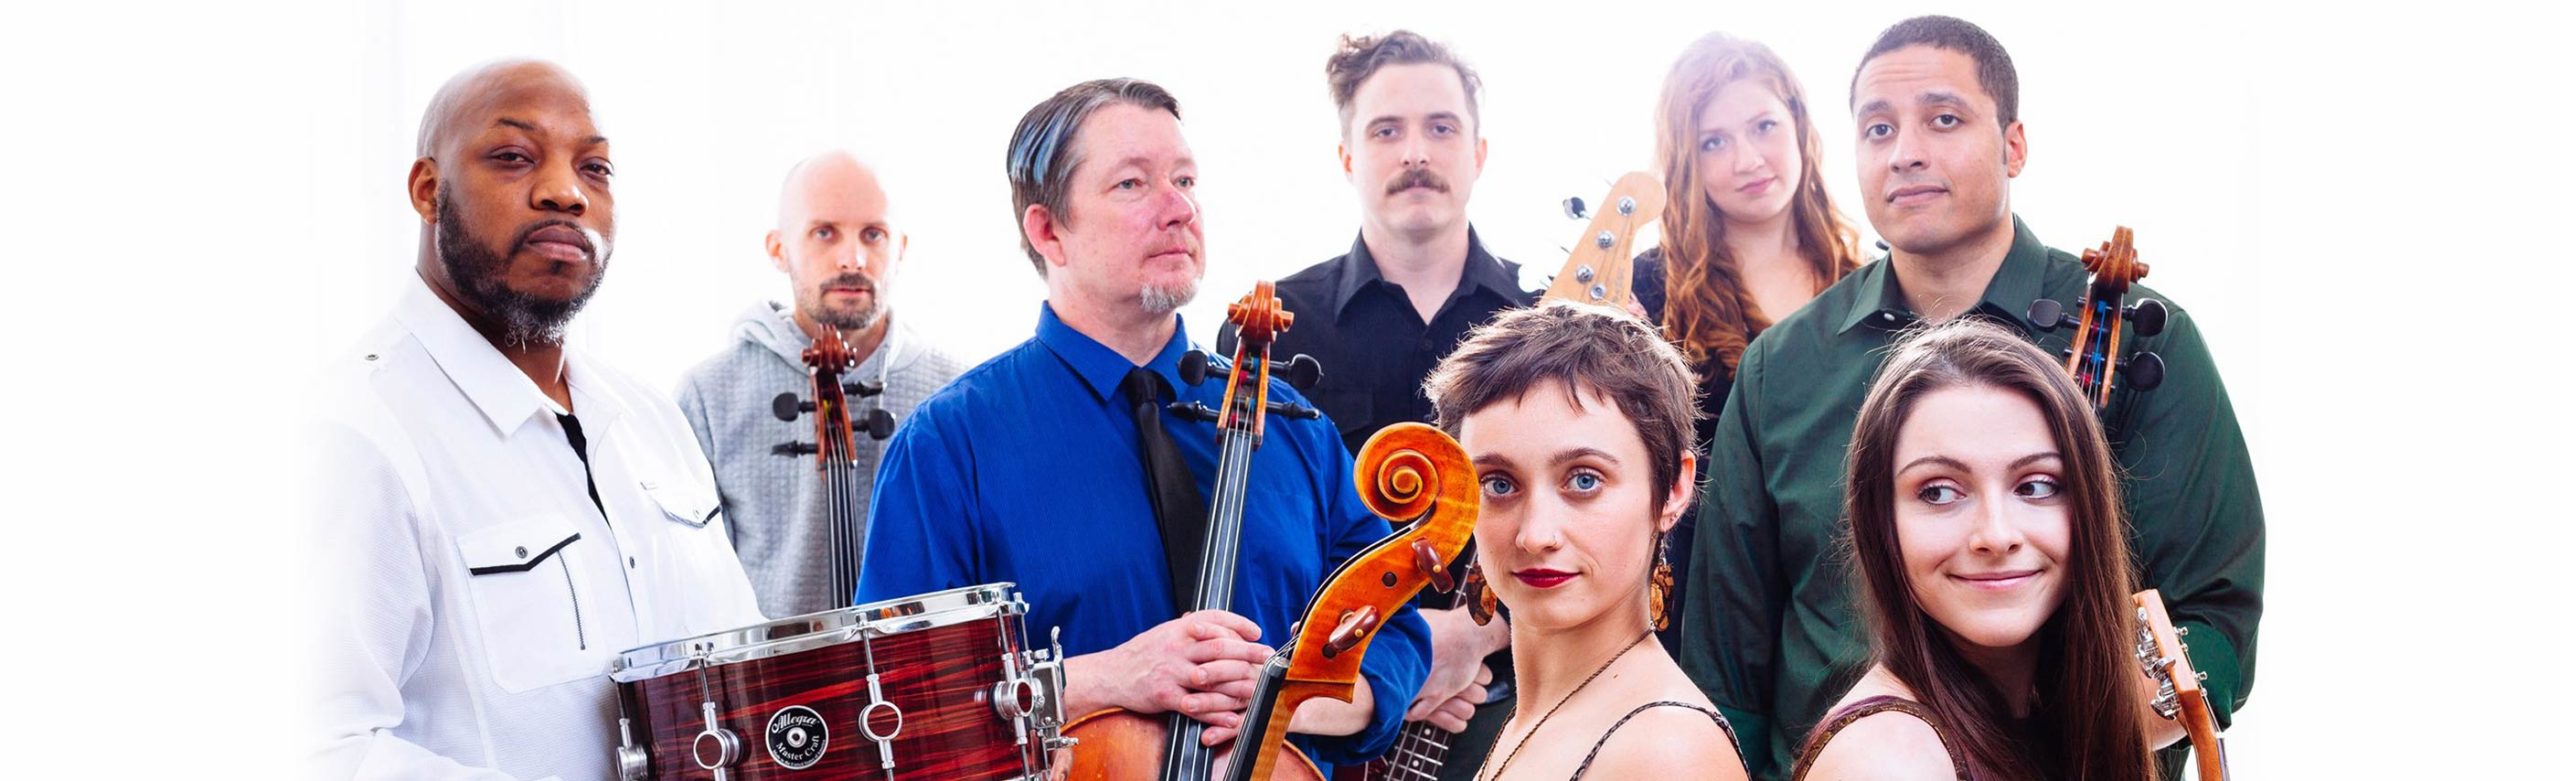 JUST ANNOUNCED: Portland Cello Project Returns to Missoula Image